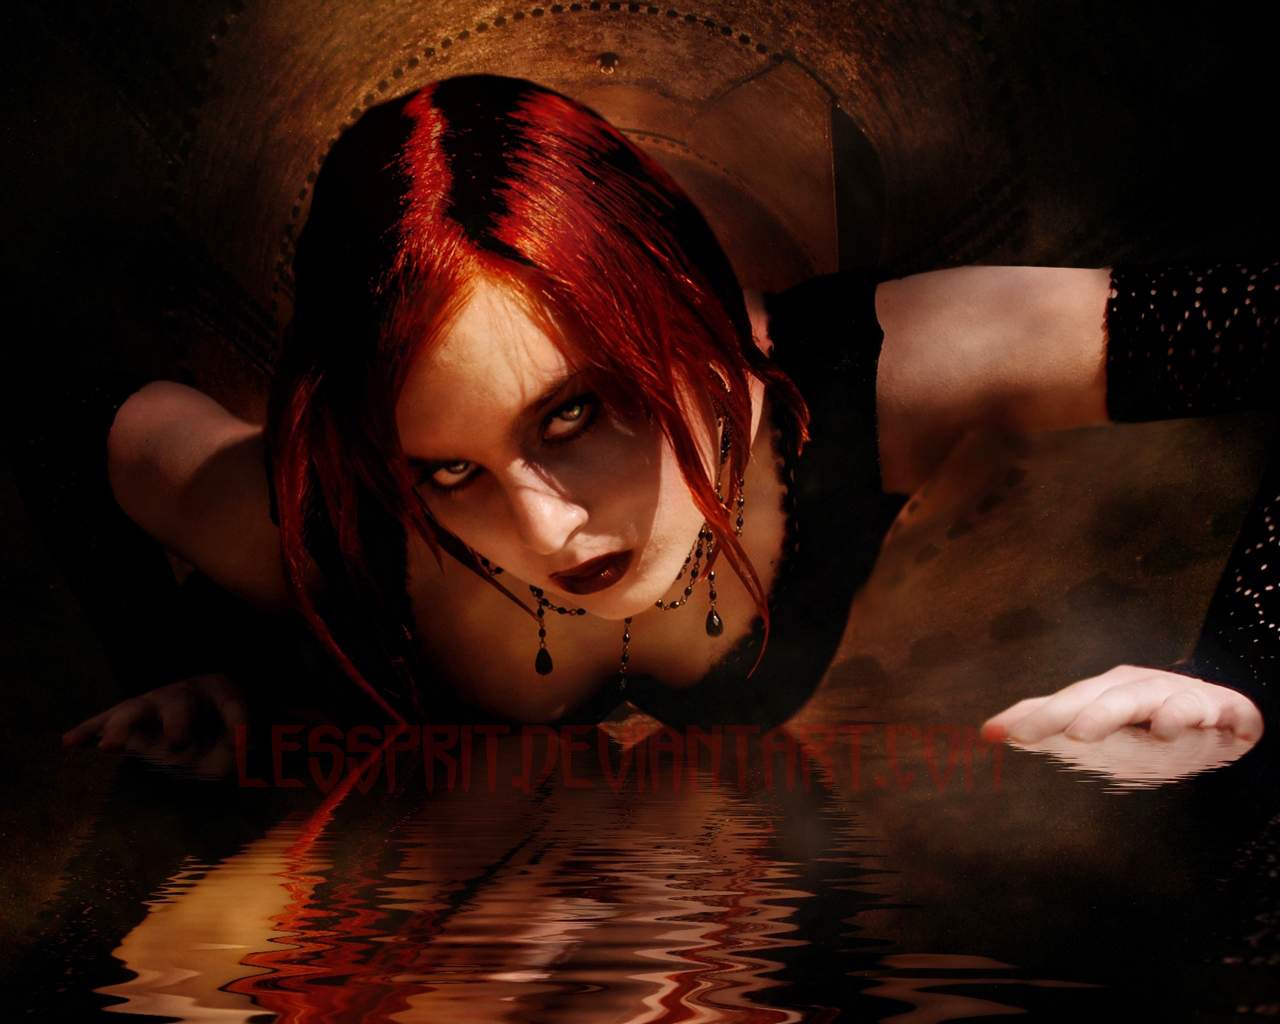 gothic wallpaper hd,cg artwork,red hair,fictional character,flesh,photography